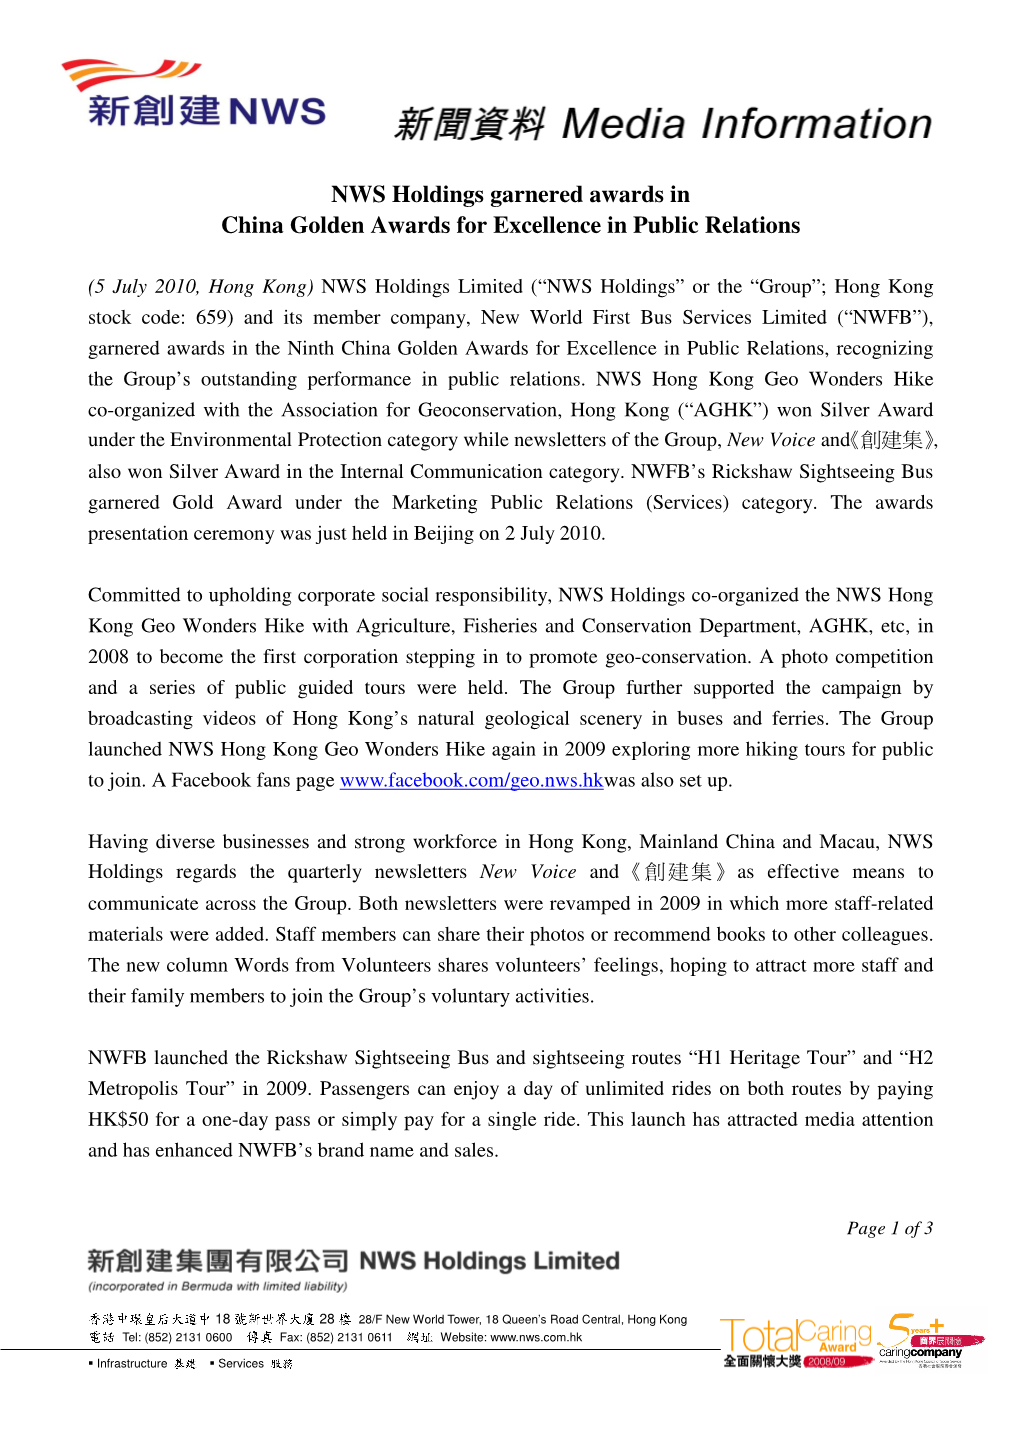 NWS Holdings Garnered Awards in China Golden Awards for Excellence in Public Relations